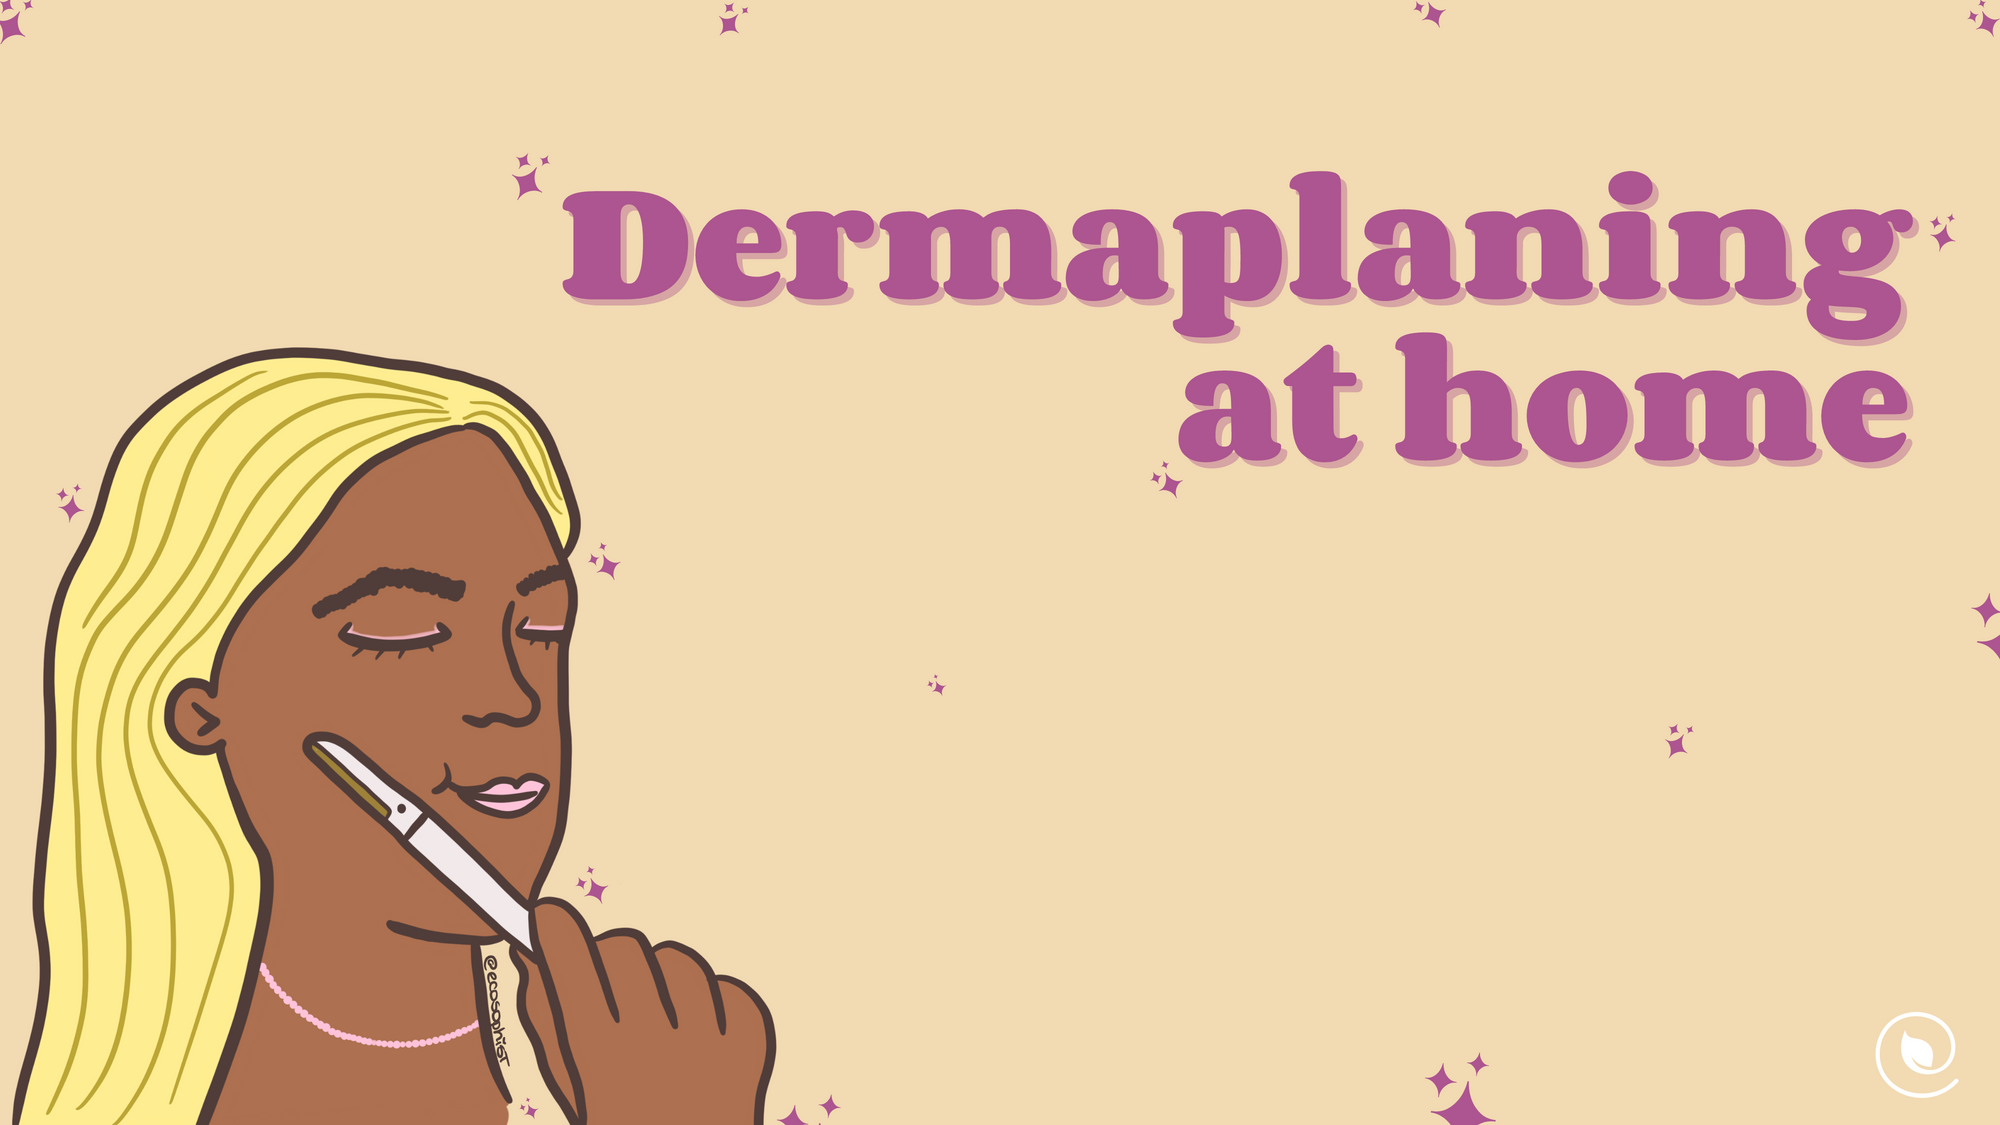 How to Dermaplane your face at home?